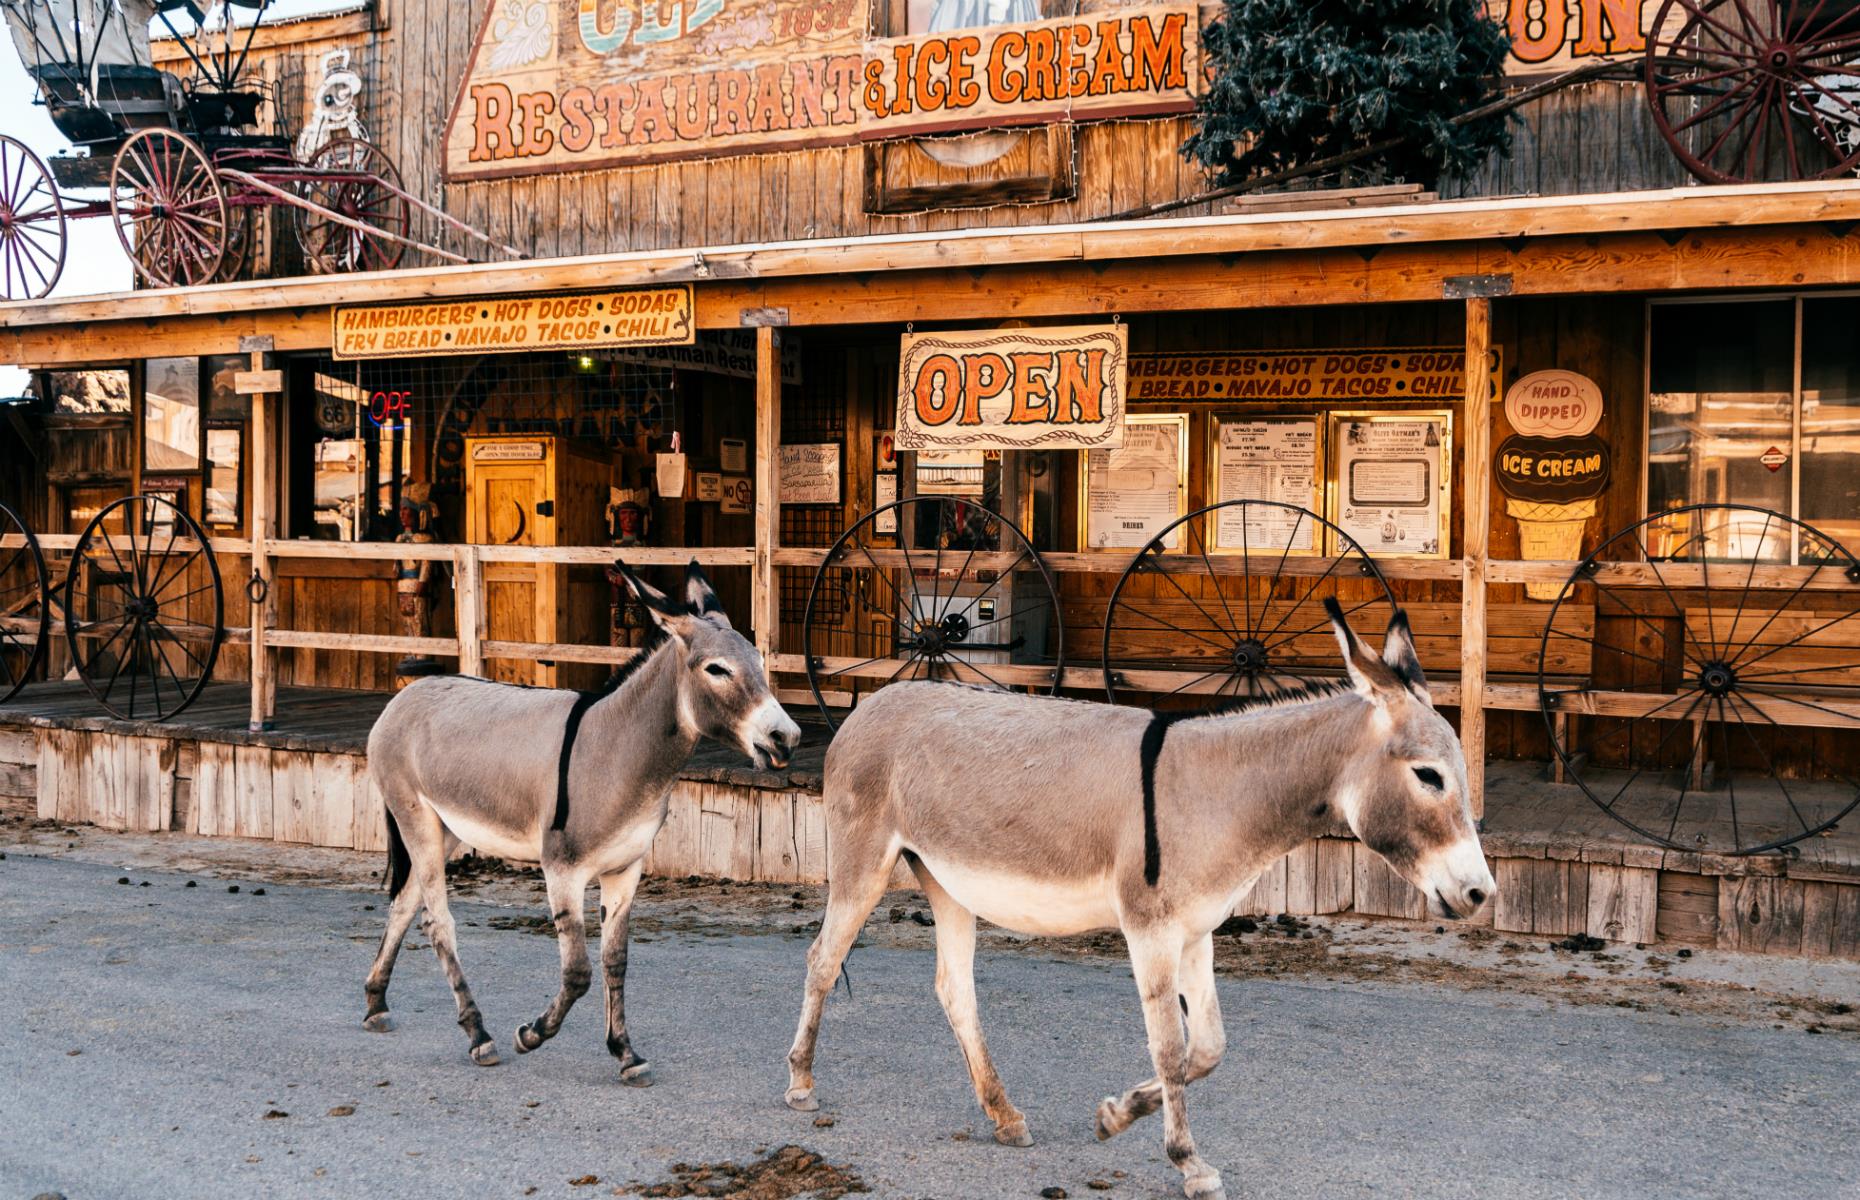 <p>The tiny ghost town of Oatman, Arizona, on historic Route 66, has some unusual residents – wild donkeys, or burros. The animals, which roam the streets, were originally brought here by prospectors and set loose in the surrounding mountains when the gold mine closed in 1942. They’re so beloved – and such a part of the town’s fabric – that they even feature on the welcome sign, while stores sell special “burro food”. Take a look at <a href="https://www.loveexploring.com/galleries/77836/the-eeriest-ghost-towns-in-america">America's eeriest ghost towns</a>.</p>